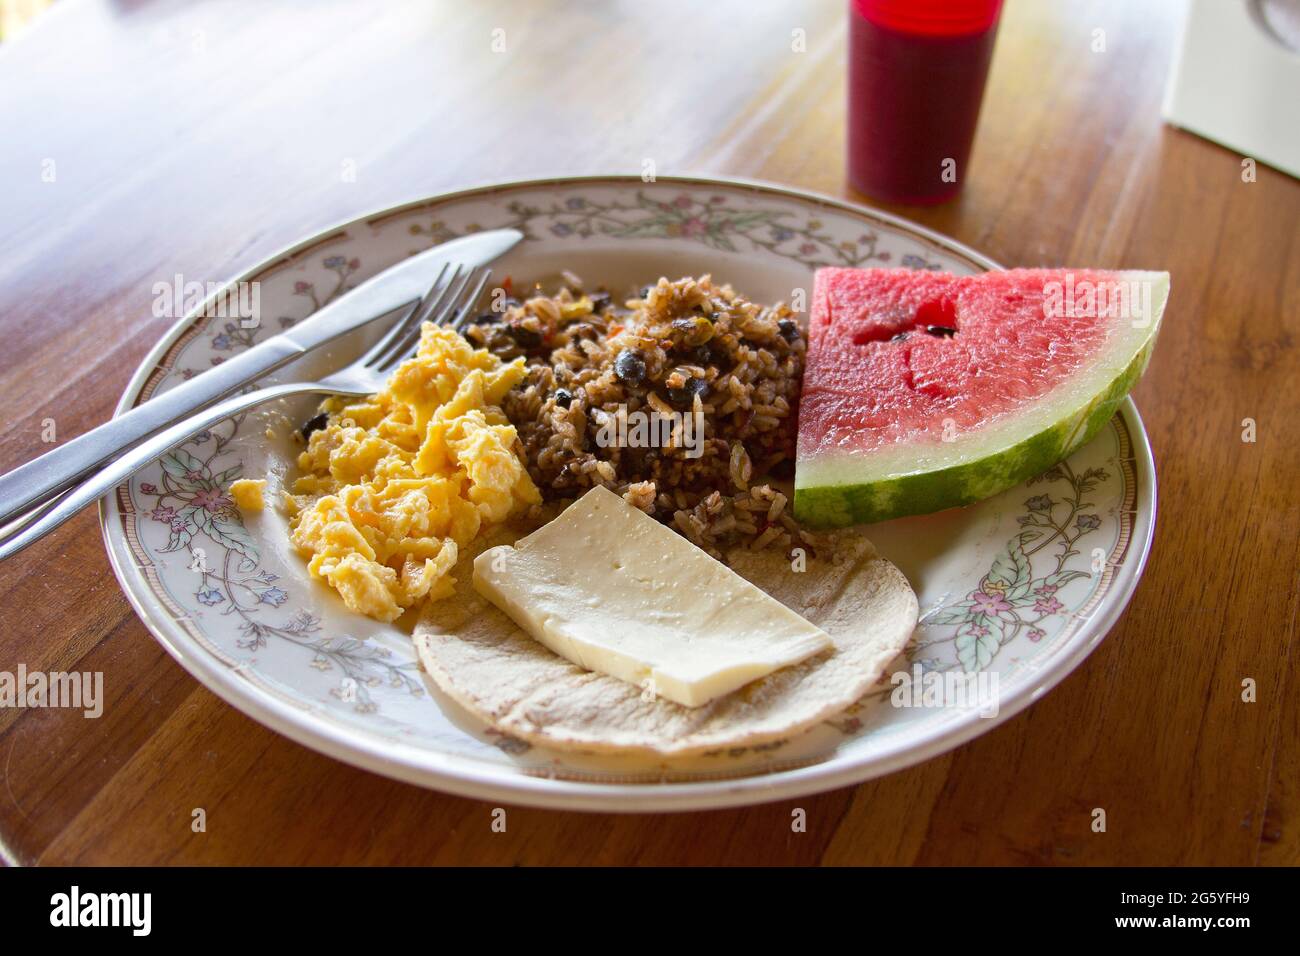 A breakfast of gallo pinto, eggs, cheese, tortilla, and fruit. Stock Photo